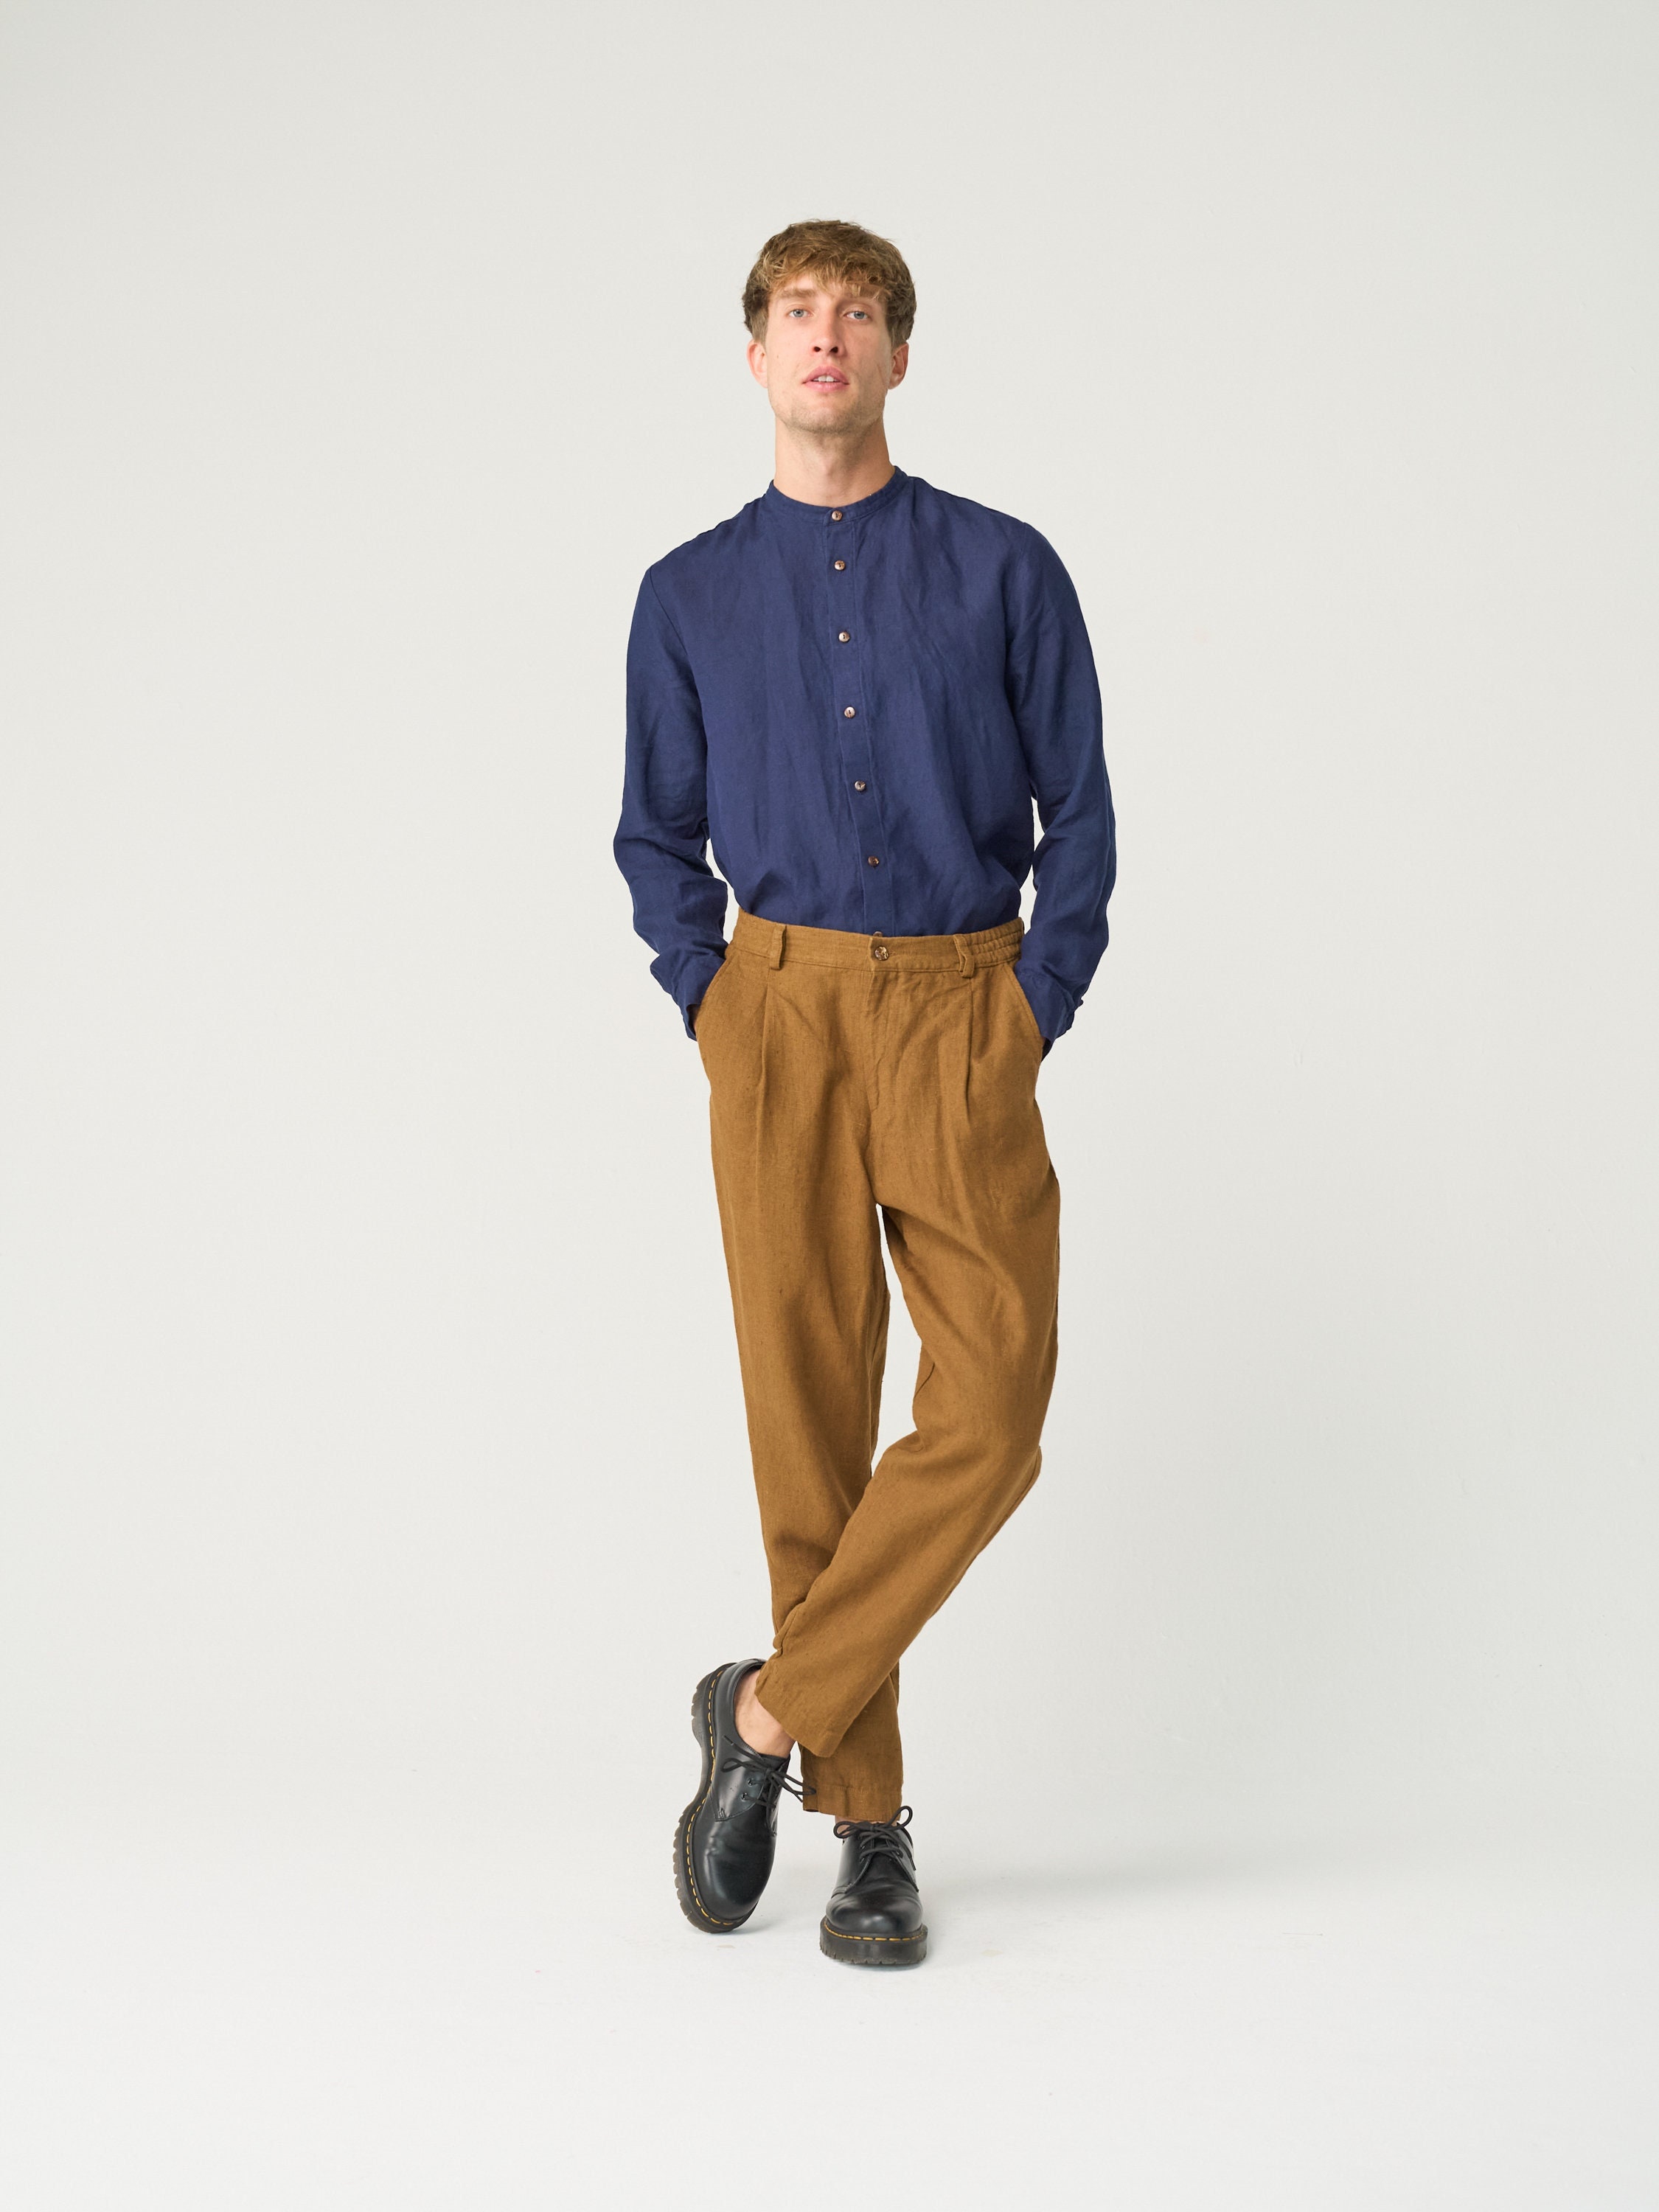 Tapered Linen Pants for Men With Zipper and Elastic Back, Pleated